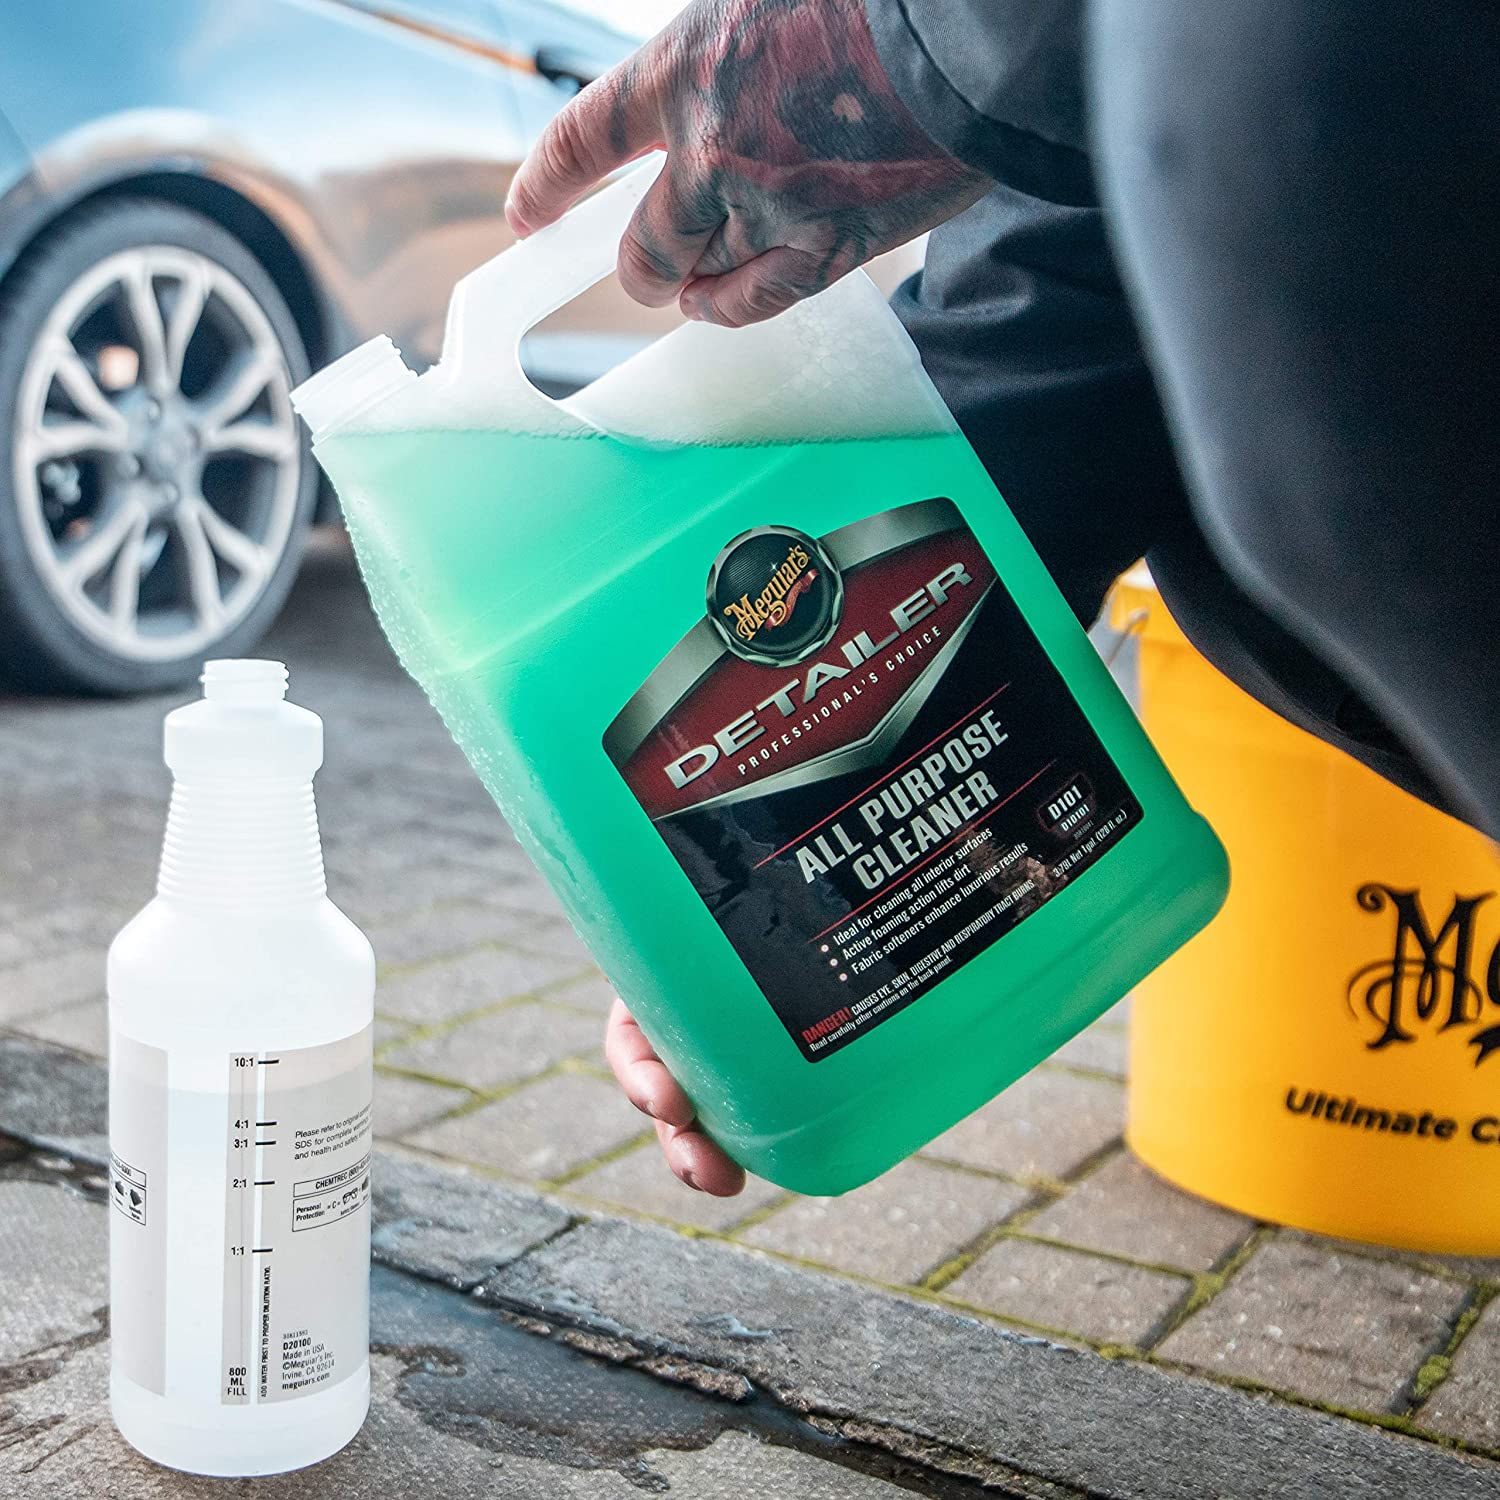 10 Use For All Purpose Cleaner - Car Detailing! 